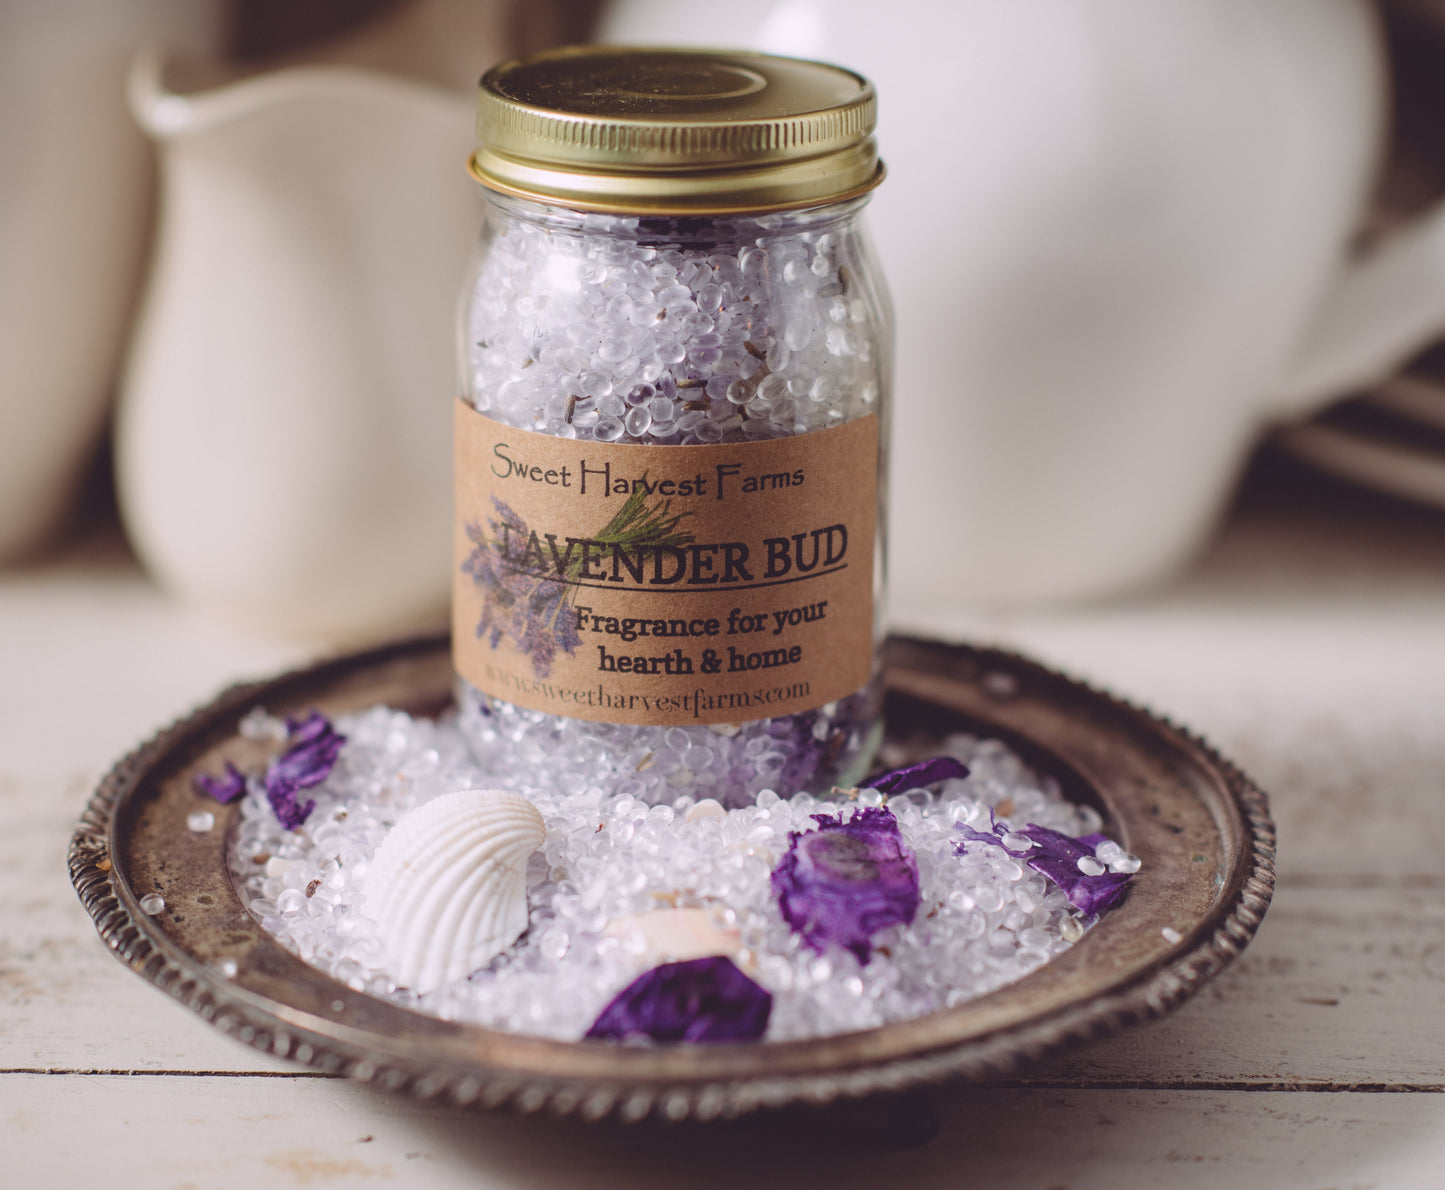 Lavender Bud Aroma Beads Potpourri - This jar of beads will last forever!